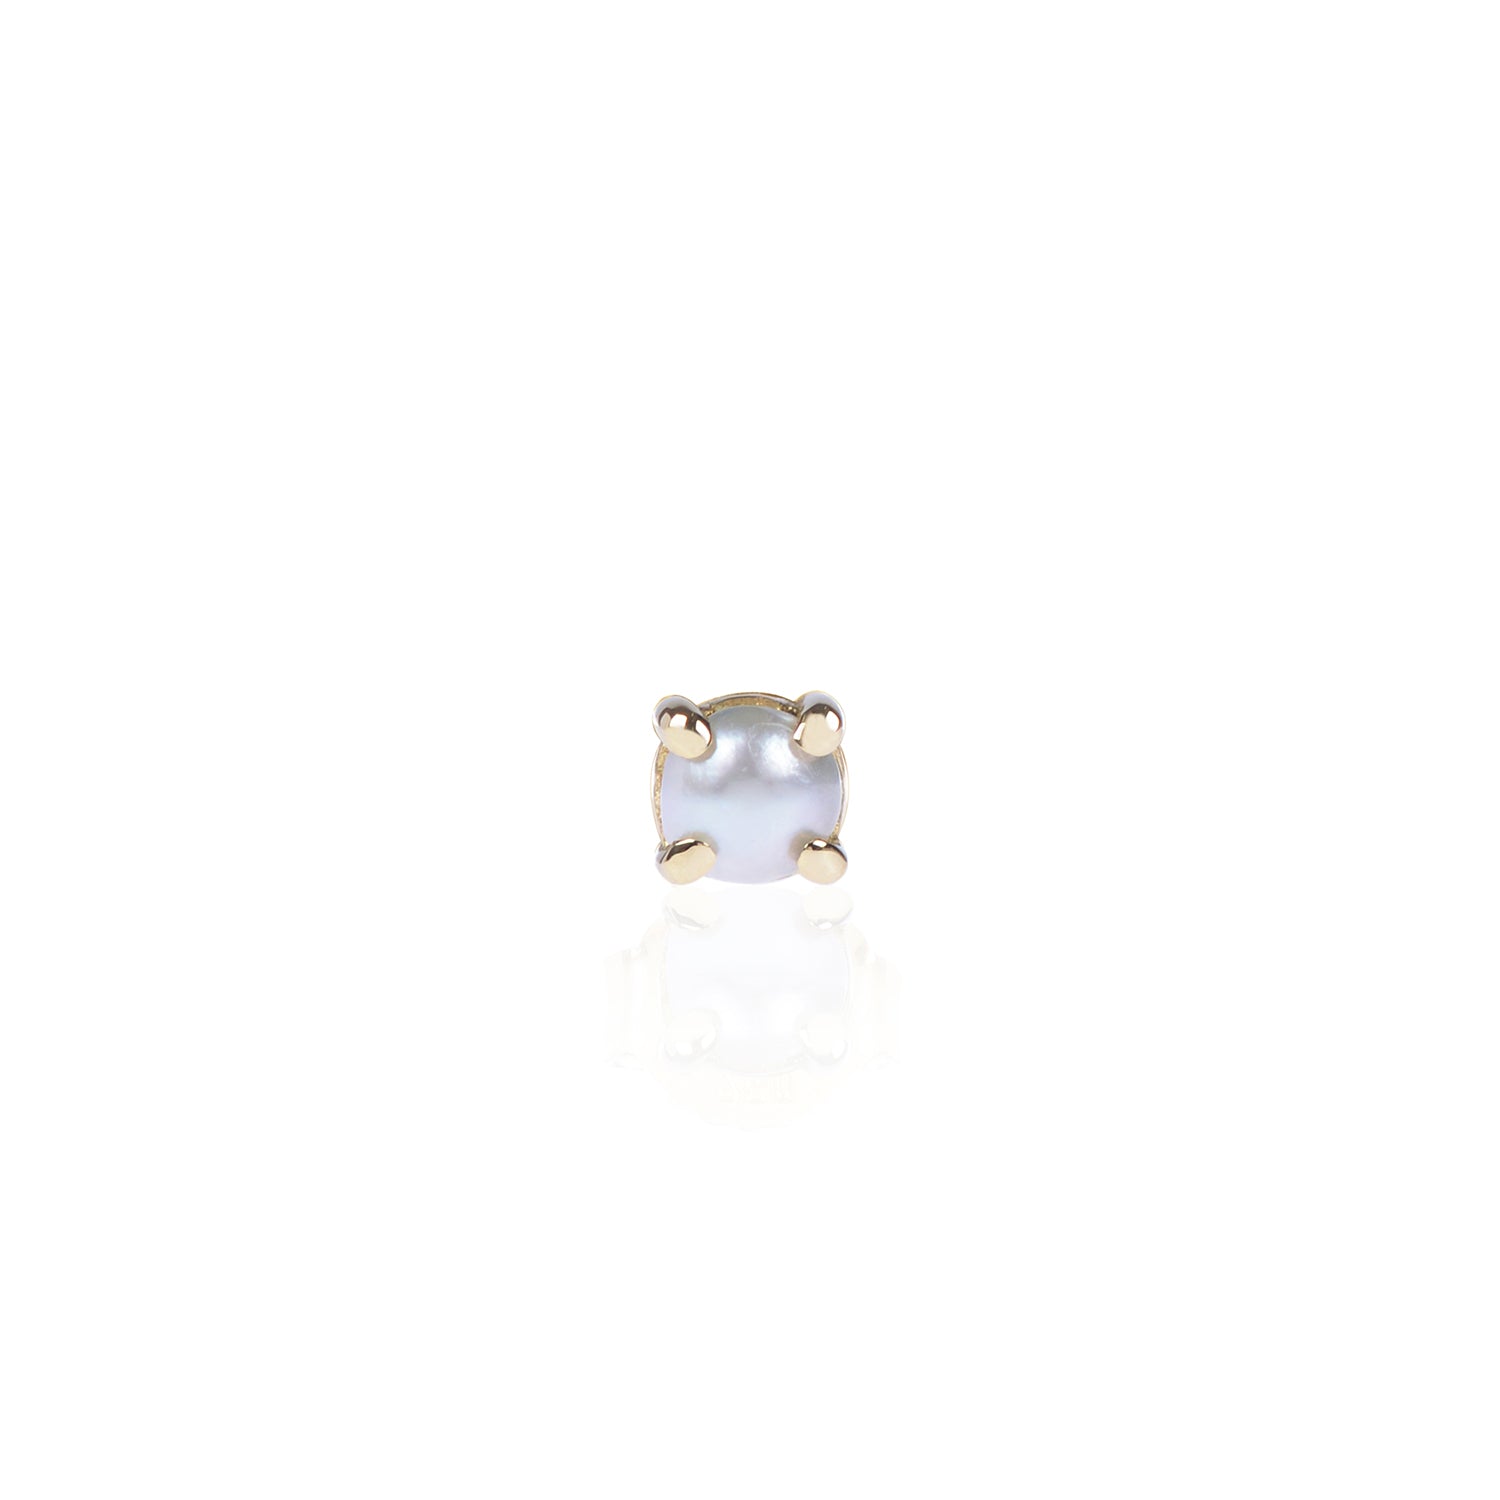 Mabe Pearl Stud in 18ct yellow gold by McFarlane Fine Jewellery